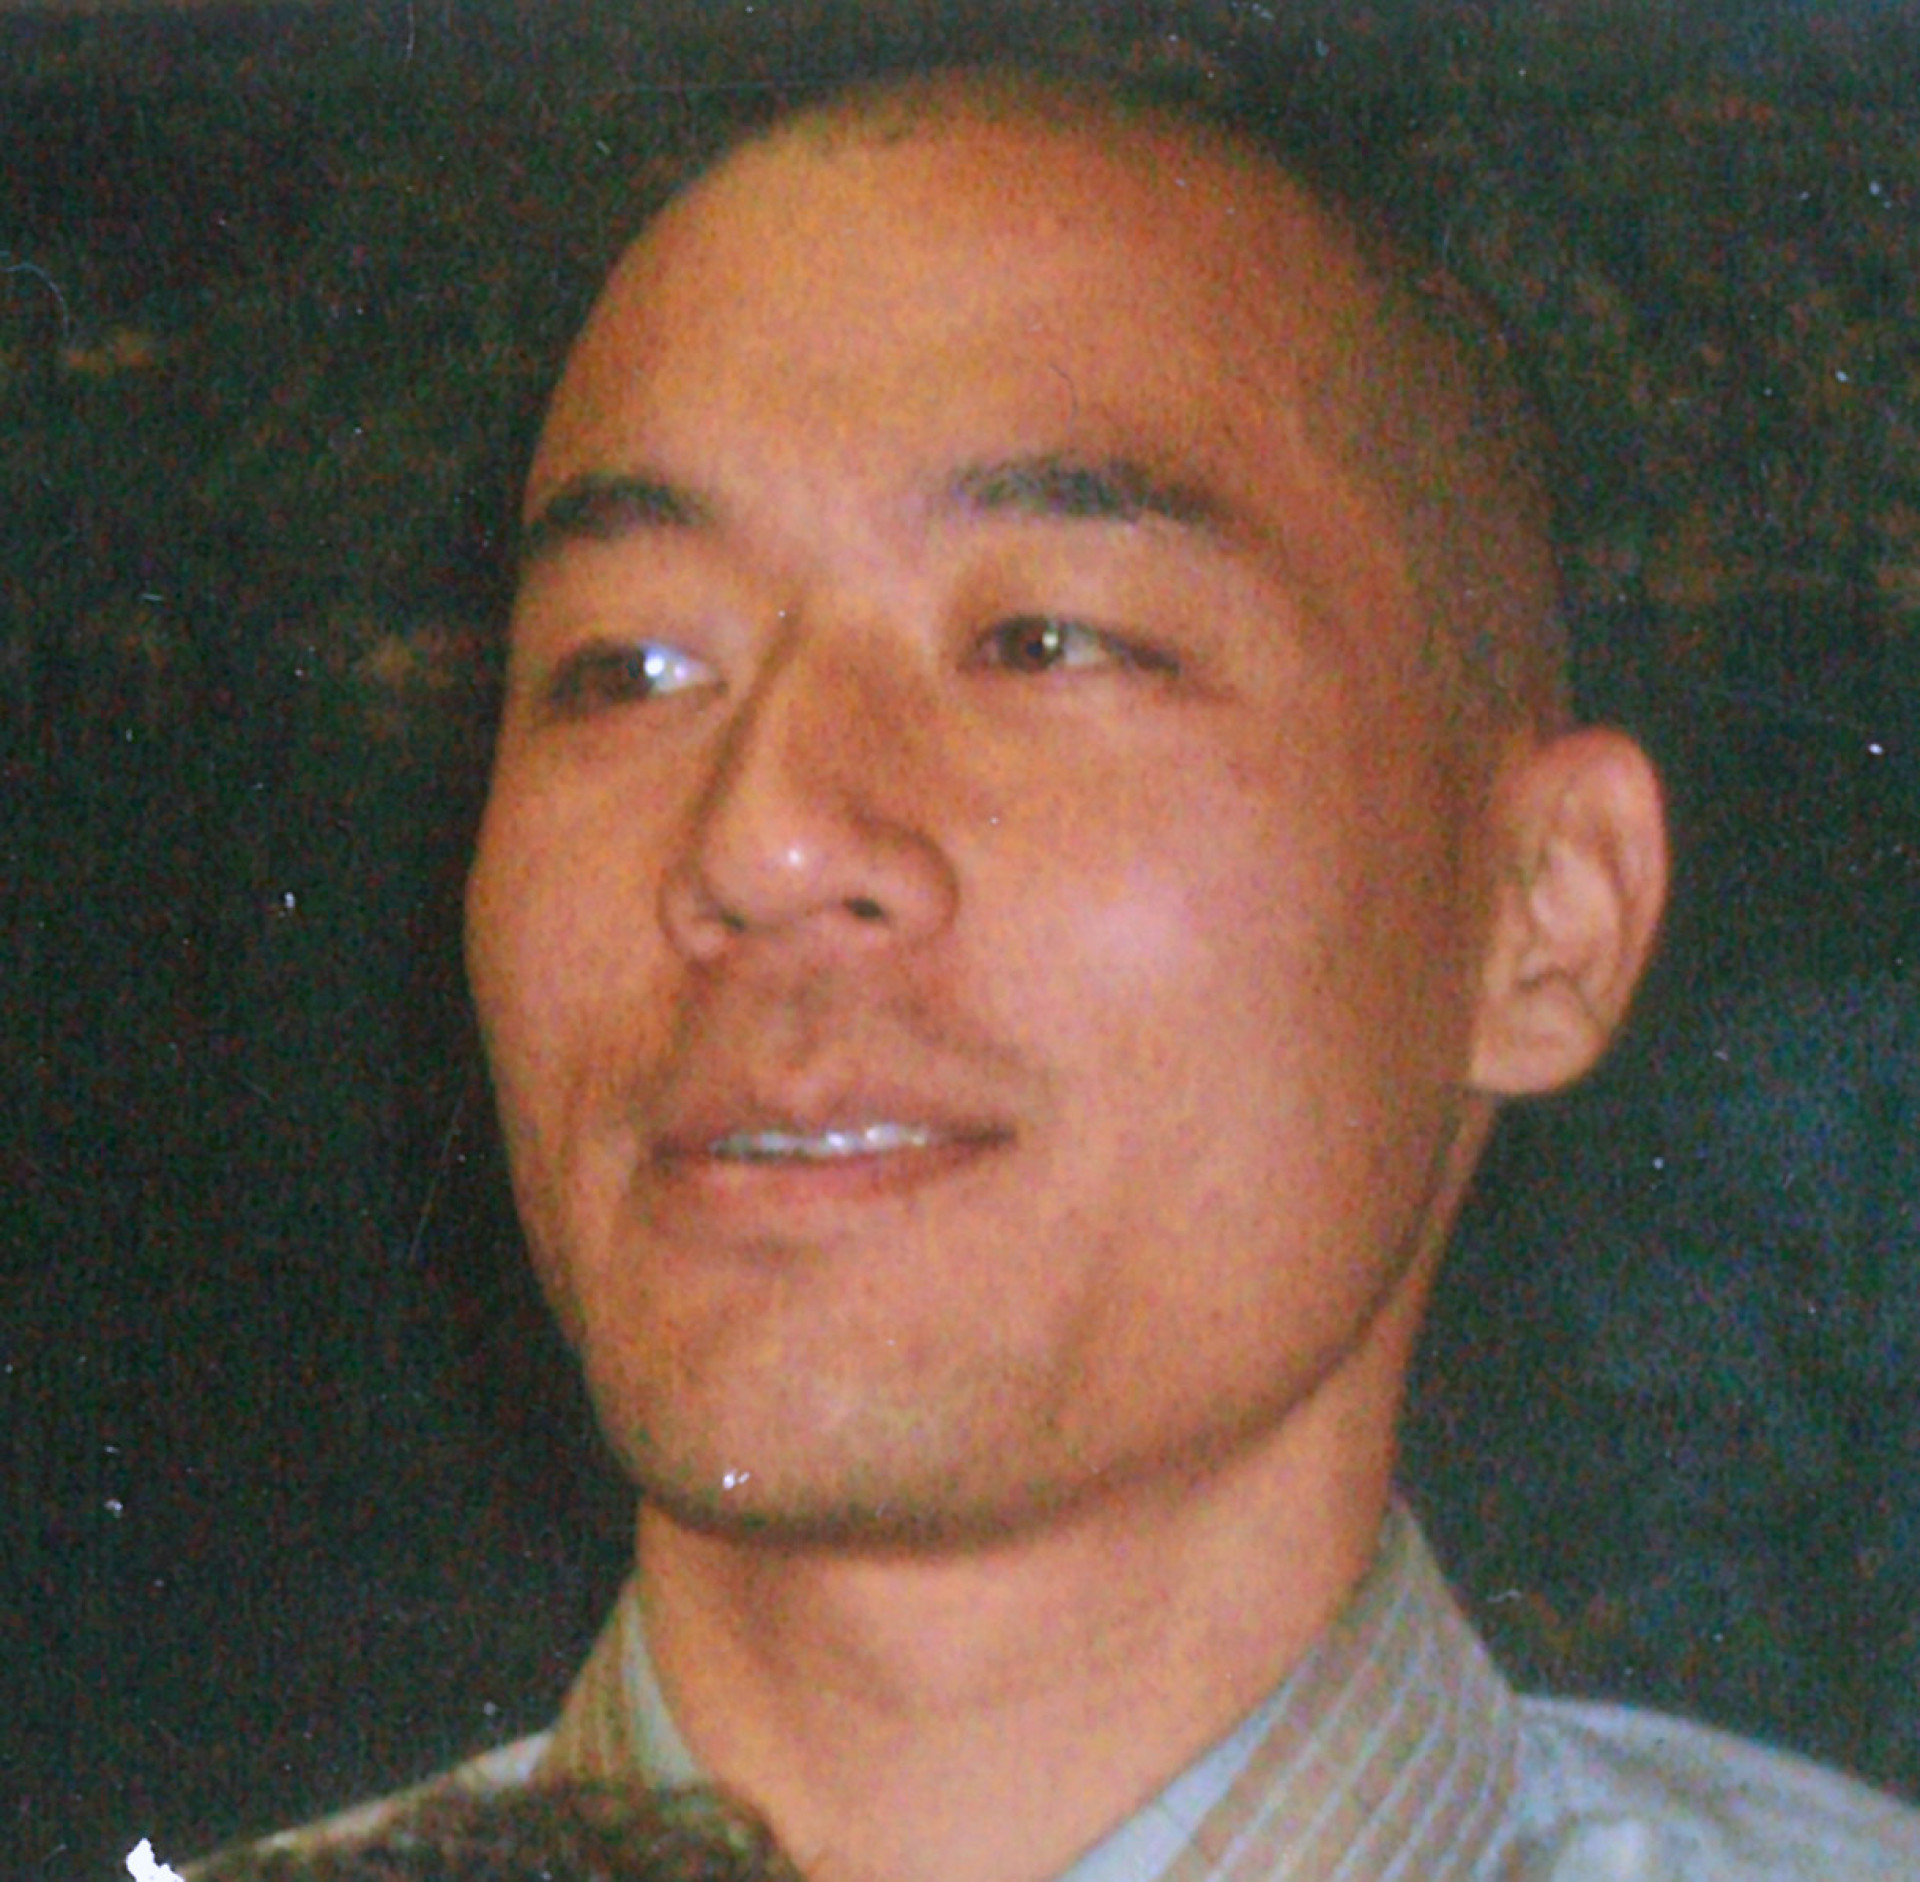 <p>Korean-American activist Robert Park was arrested in December 2009 after crossing the border from China into North Korea as a protest against the country's violation of human rights. Park was detained and released in February 2010. Robert Park claimed he was tortured during his imprisonment.</p><p>You may also like:<a href="https://www.starsinsider.com/n/412072?utm_source=msn.com&utm_medium=display&utm_campaign=referral_description&utm_content=563464en-en"> The dark secrets of the British royal family</a></p>